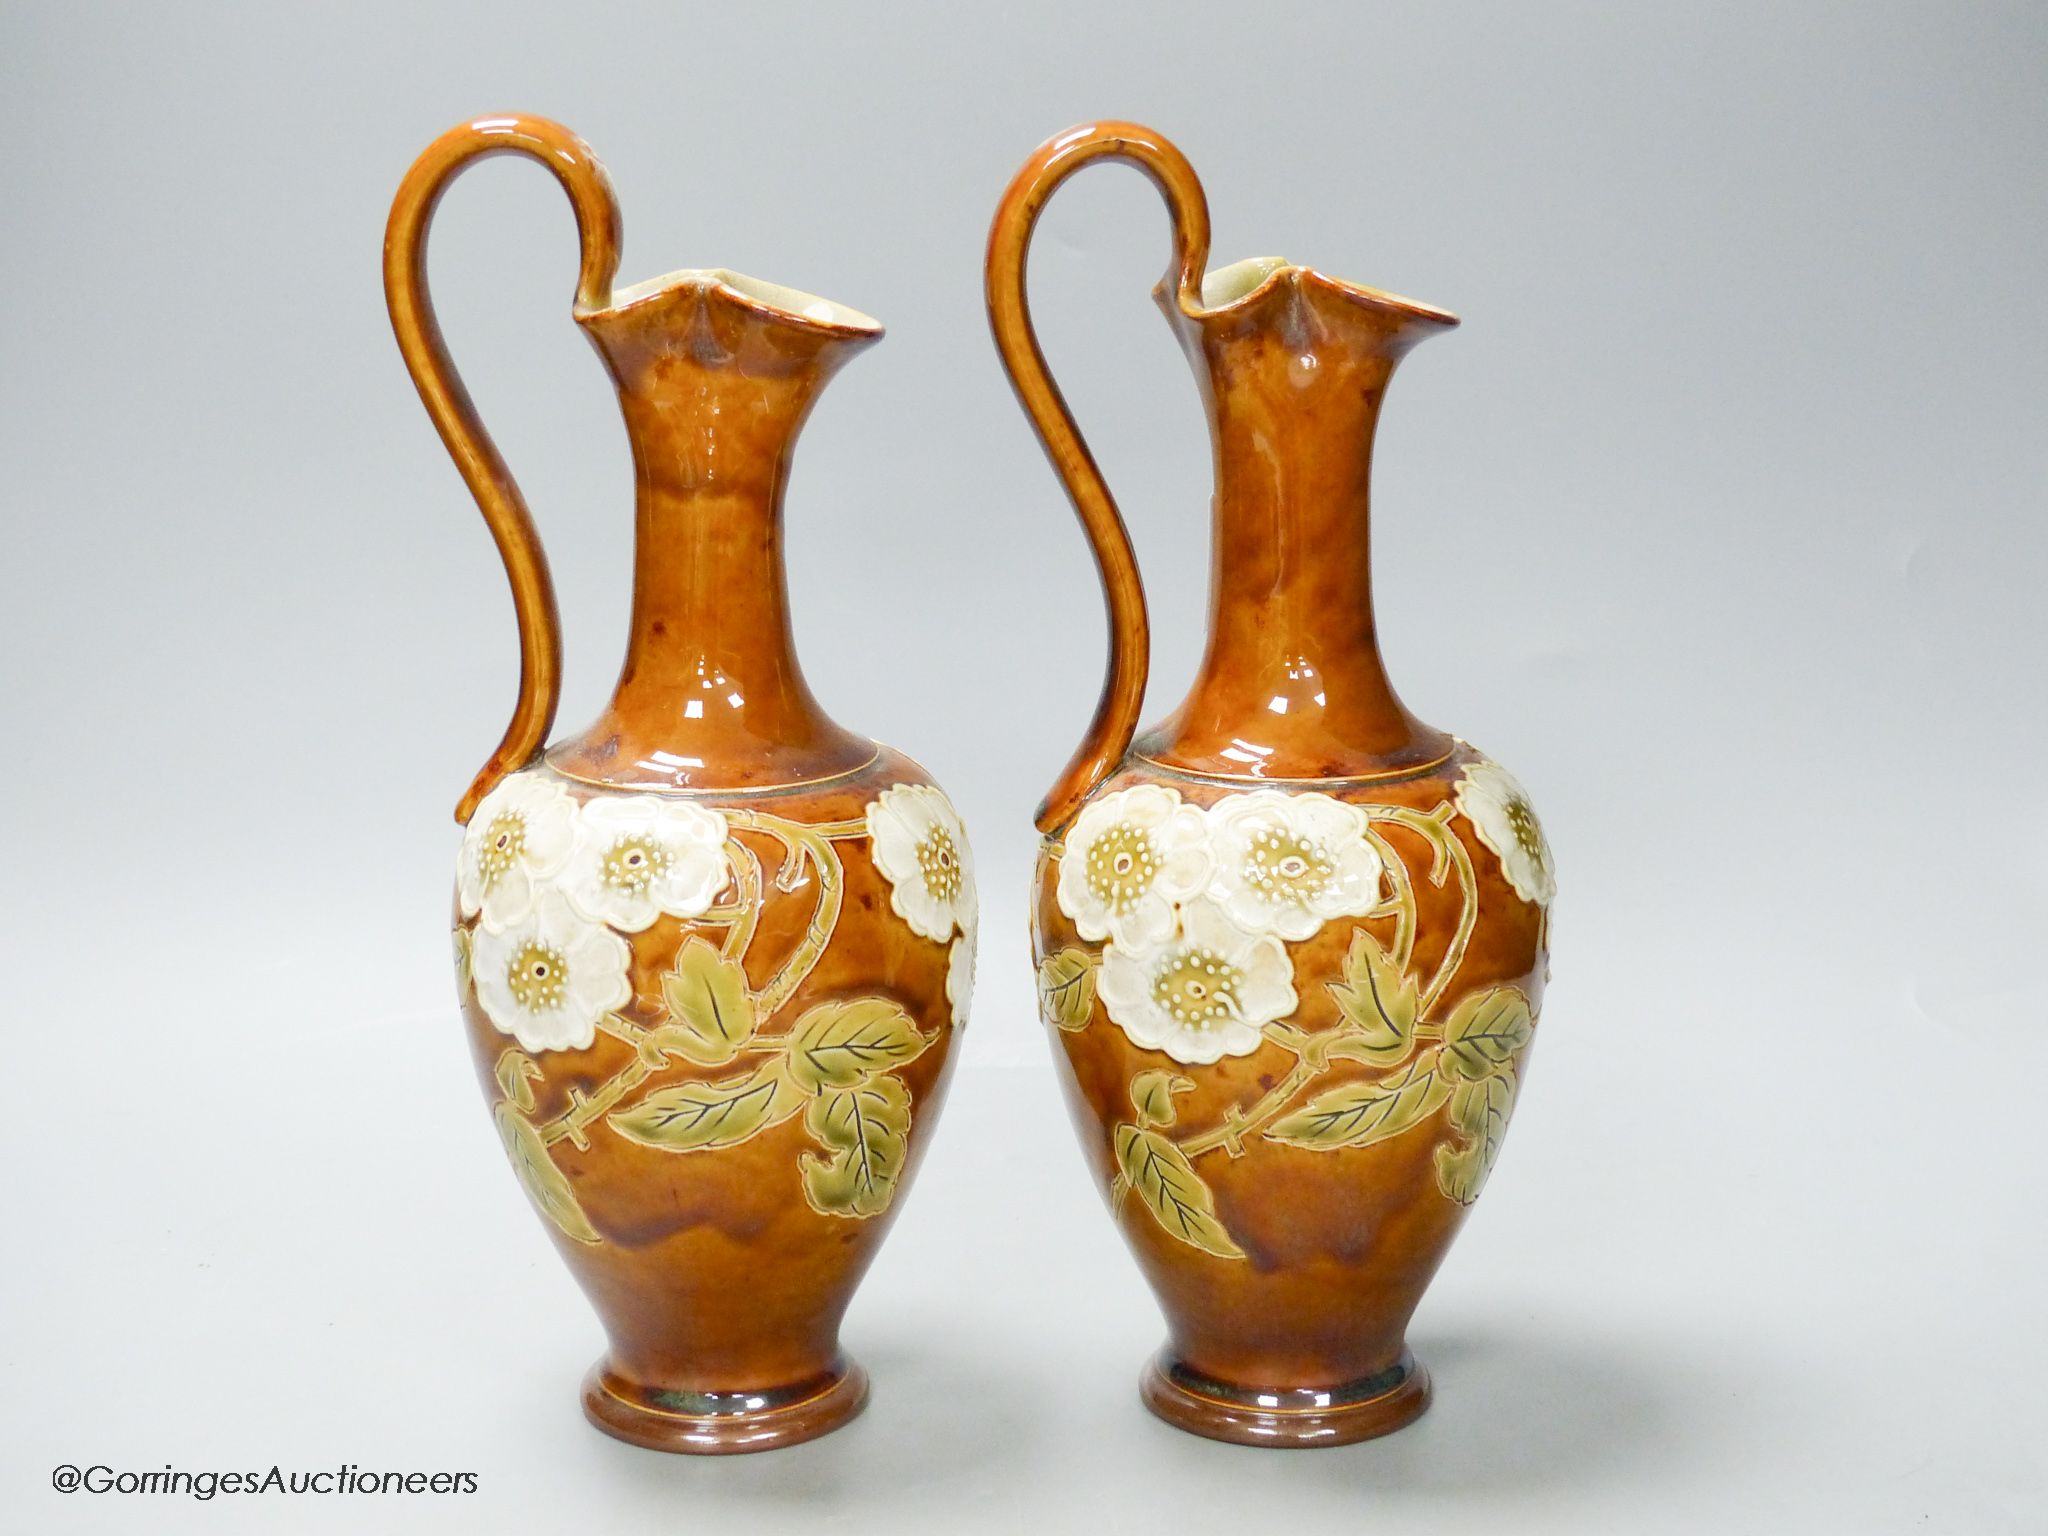 A pair of Royal Doulton stoneware ewers, height 30cm